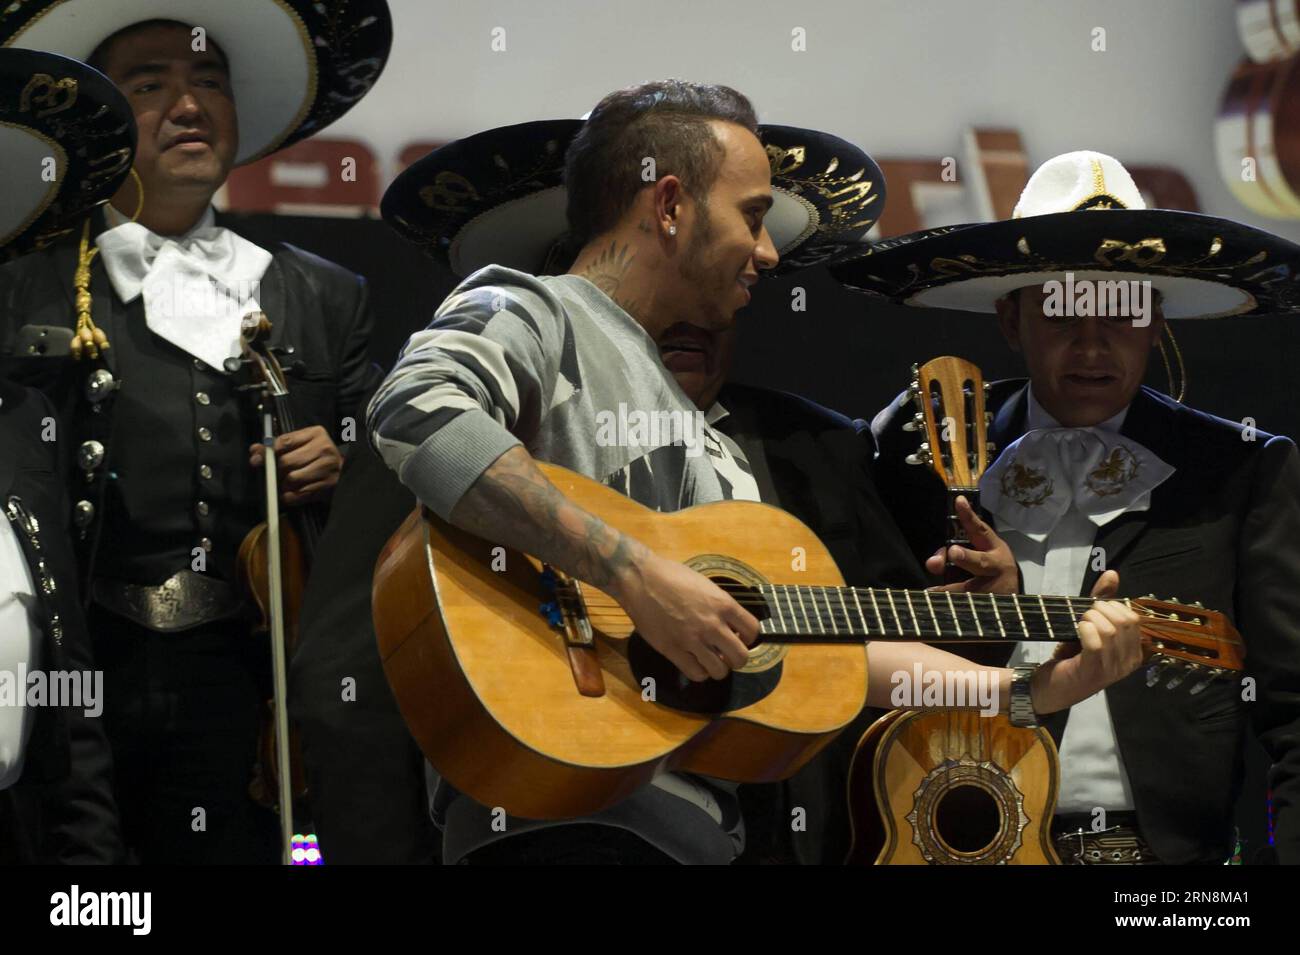 (151029) -- MEXICO CITY,  - British driver Lewis Hamilton of Mercedes team, plays guitar during his visit to Arena Mexico, prior to the F1 Mexican Grand Prix, in Mexico City, capital of Mexico, on Oct. 28, 2015. According to local press, Lewis Hamilton visited on Wednesday the Arena Mexico, where he watched a wrestling exhibition and played a match of table football at the ring with Mexican soccer player Oribe Peralta. The F1 Mexican Grand Prix will be held from Oct. 30 to Nov. 1, in Mexico City. ) (SP)MEXICO-MEXICO CITY-AUTOMOBILE-F1 OSCARxRAMIREZ PUBLICATIONxNOTxINxCHN   Mexico City British Stock Photo